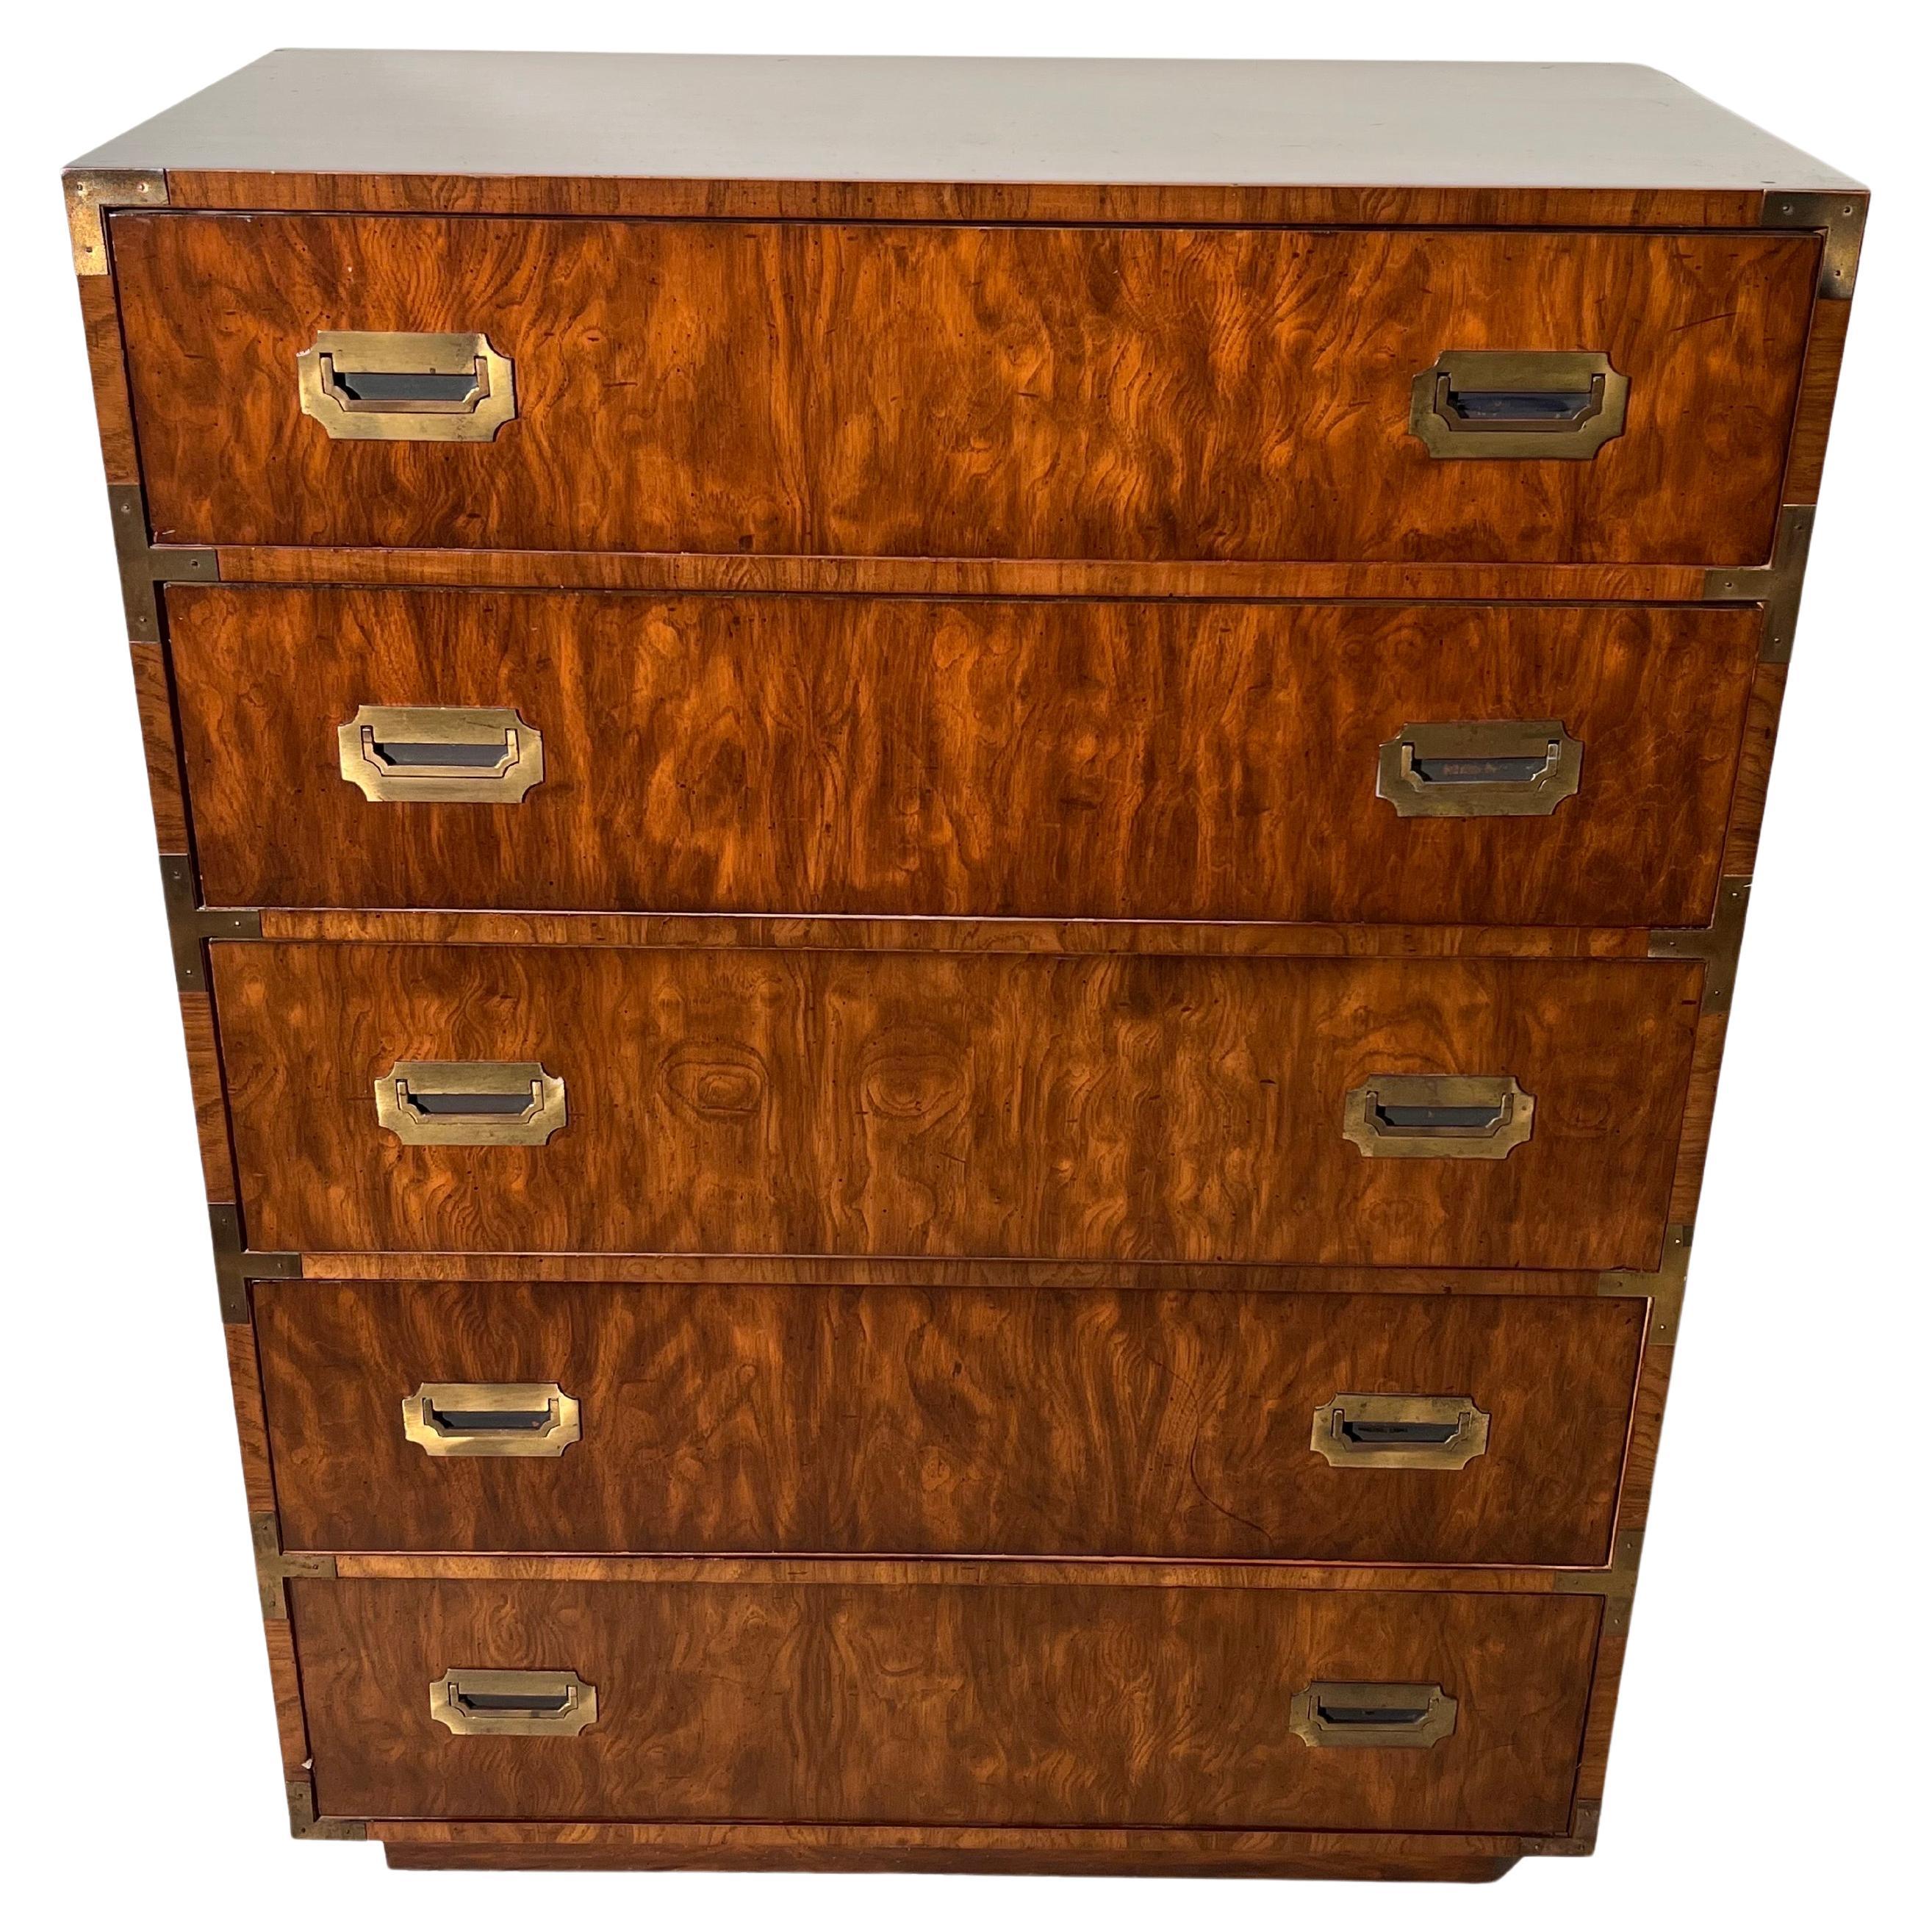 Walnut campaign dresser in the style of Henredon. Classic 5 drawer dresser with chunky recessed brass plated hardware and recessed plinth base. This Iconic 